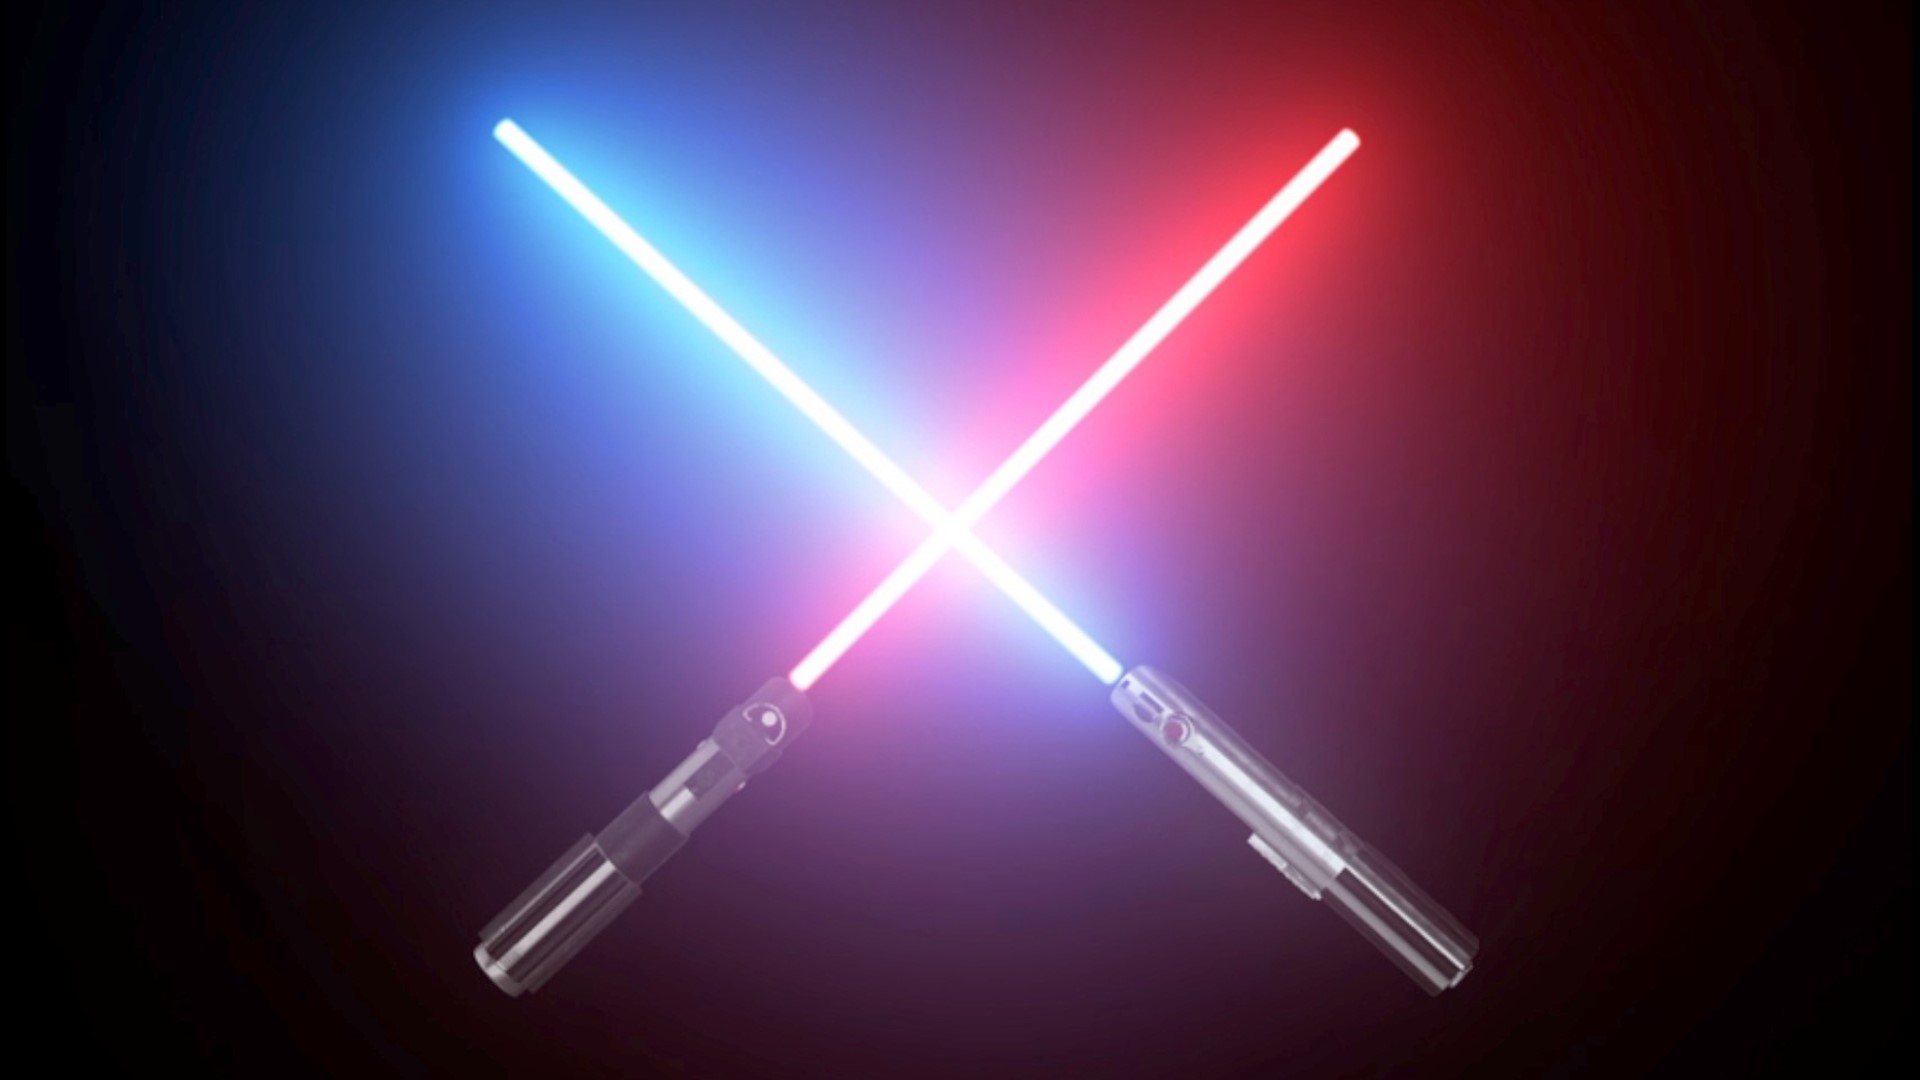 Could lightsaber technology be just around the corner?